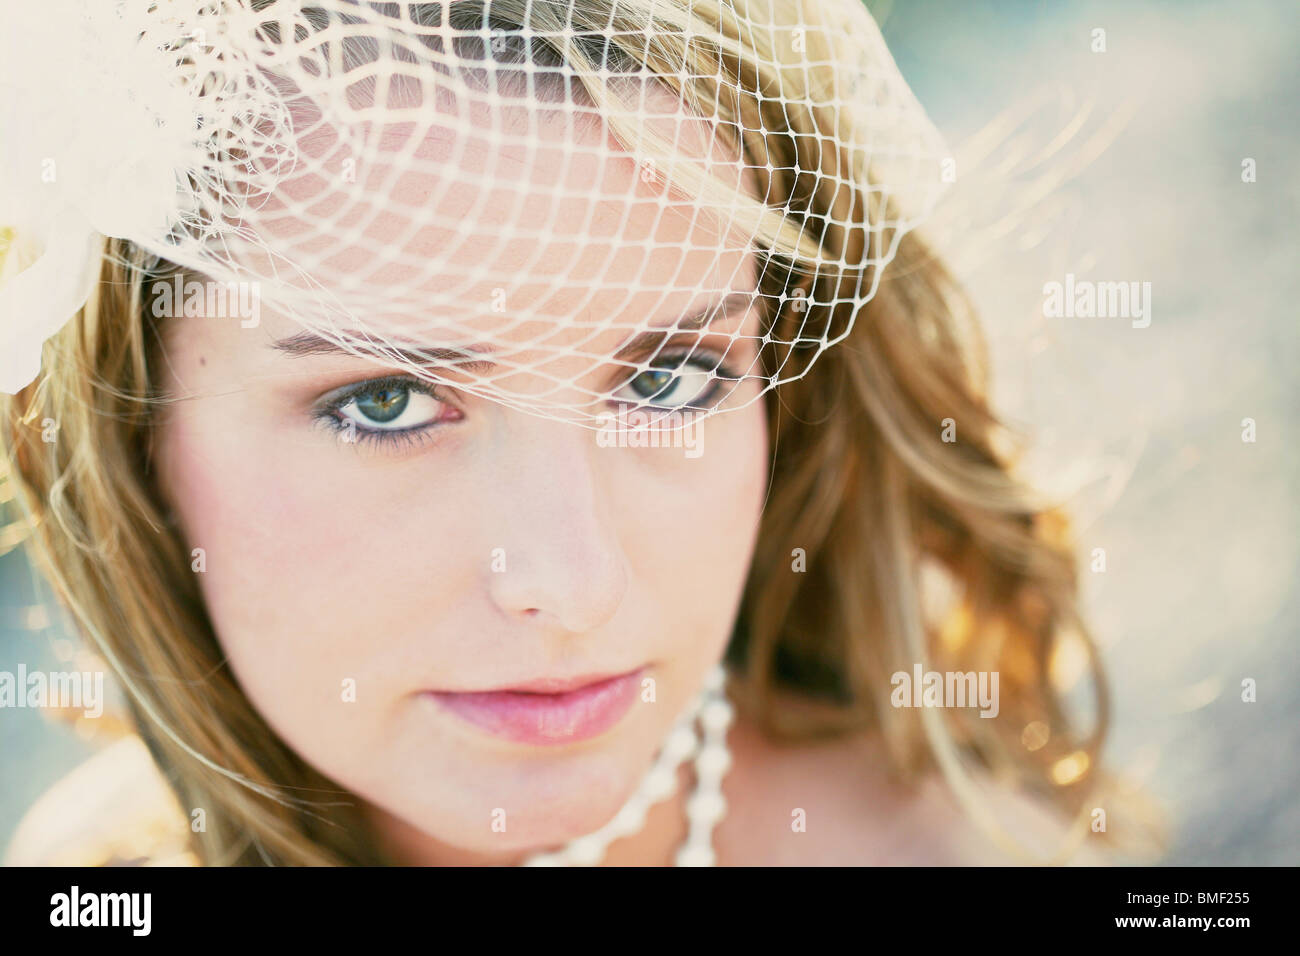 A Bride With A Veil And Pearls Stock Photo